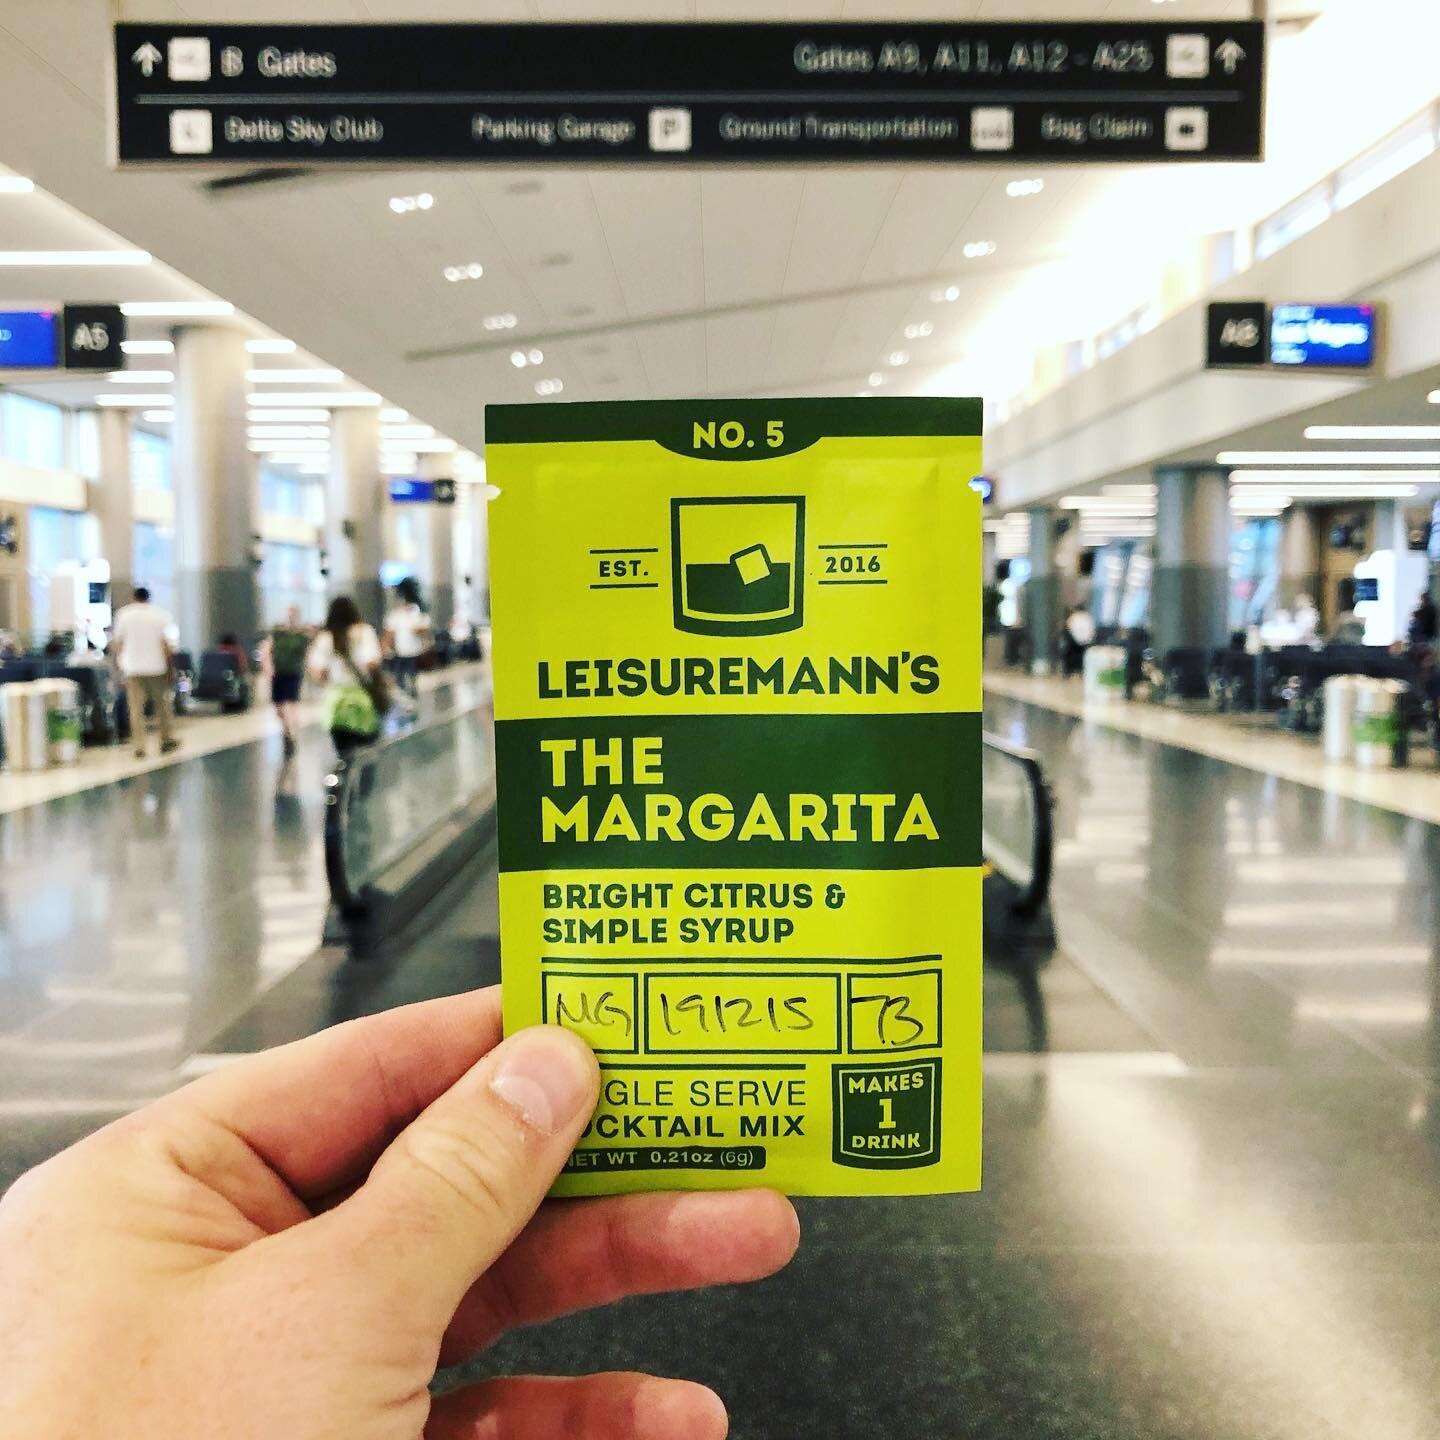 We don&rsquo;t travel nearly as much as we used to but when we do we make sure to never go thirsty&hellip;👊😜🤙✈️🍹
&bull;
NEED A DRINK ON YOUR NEXT FLIGHT?!?&hellip;Think no further than our go where you go, party in a pouch, cocktail mixer packs. 